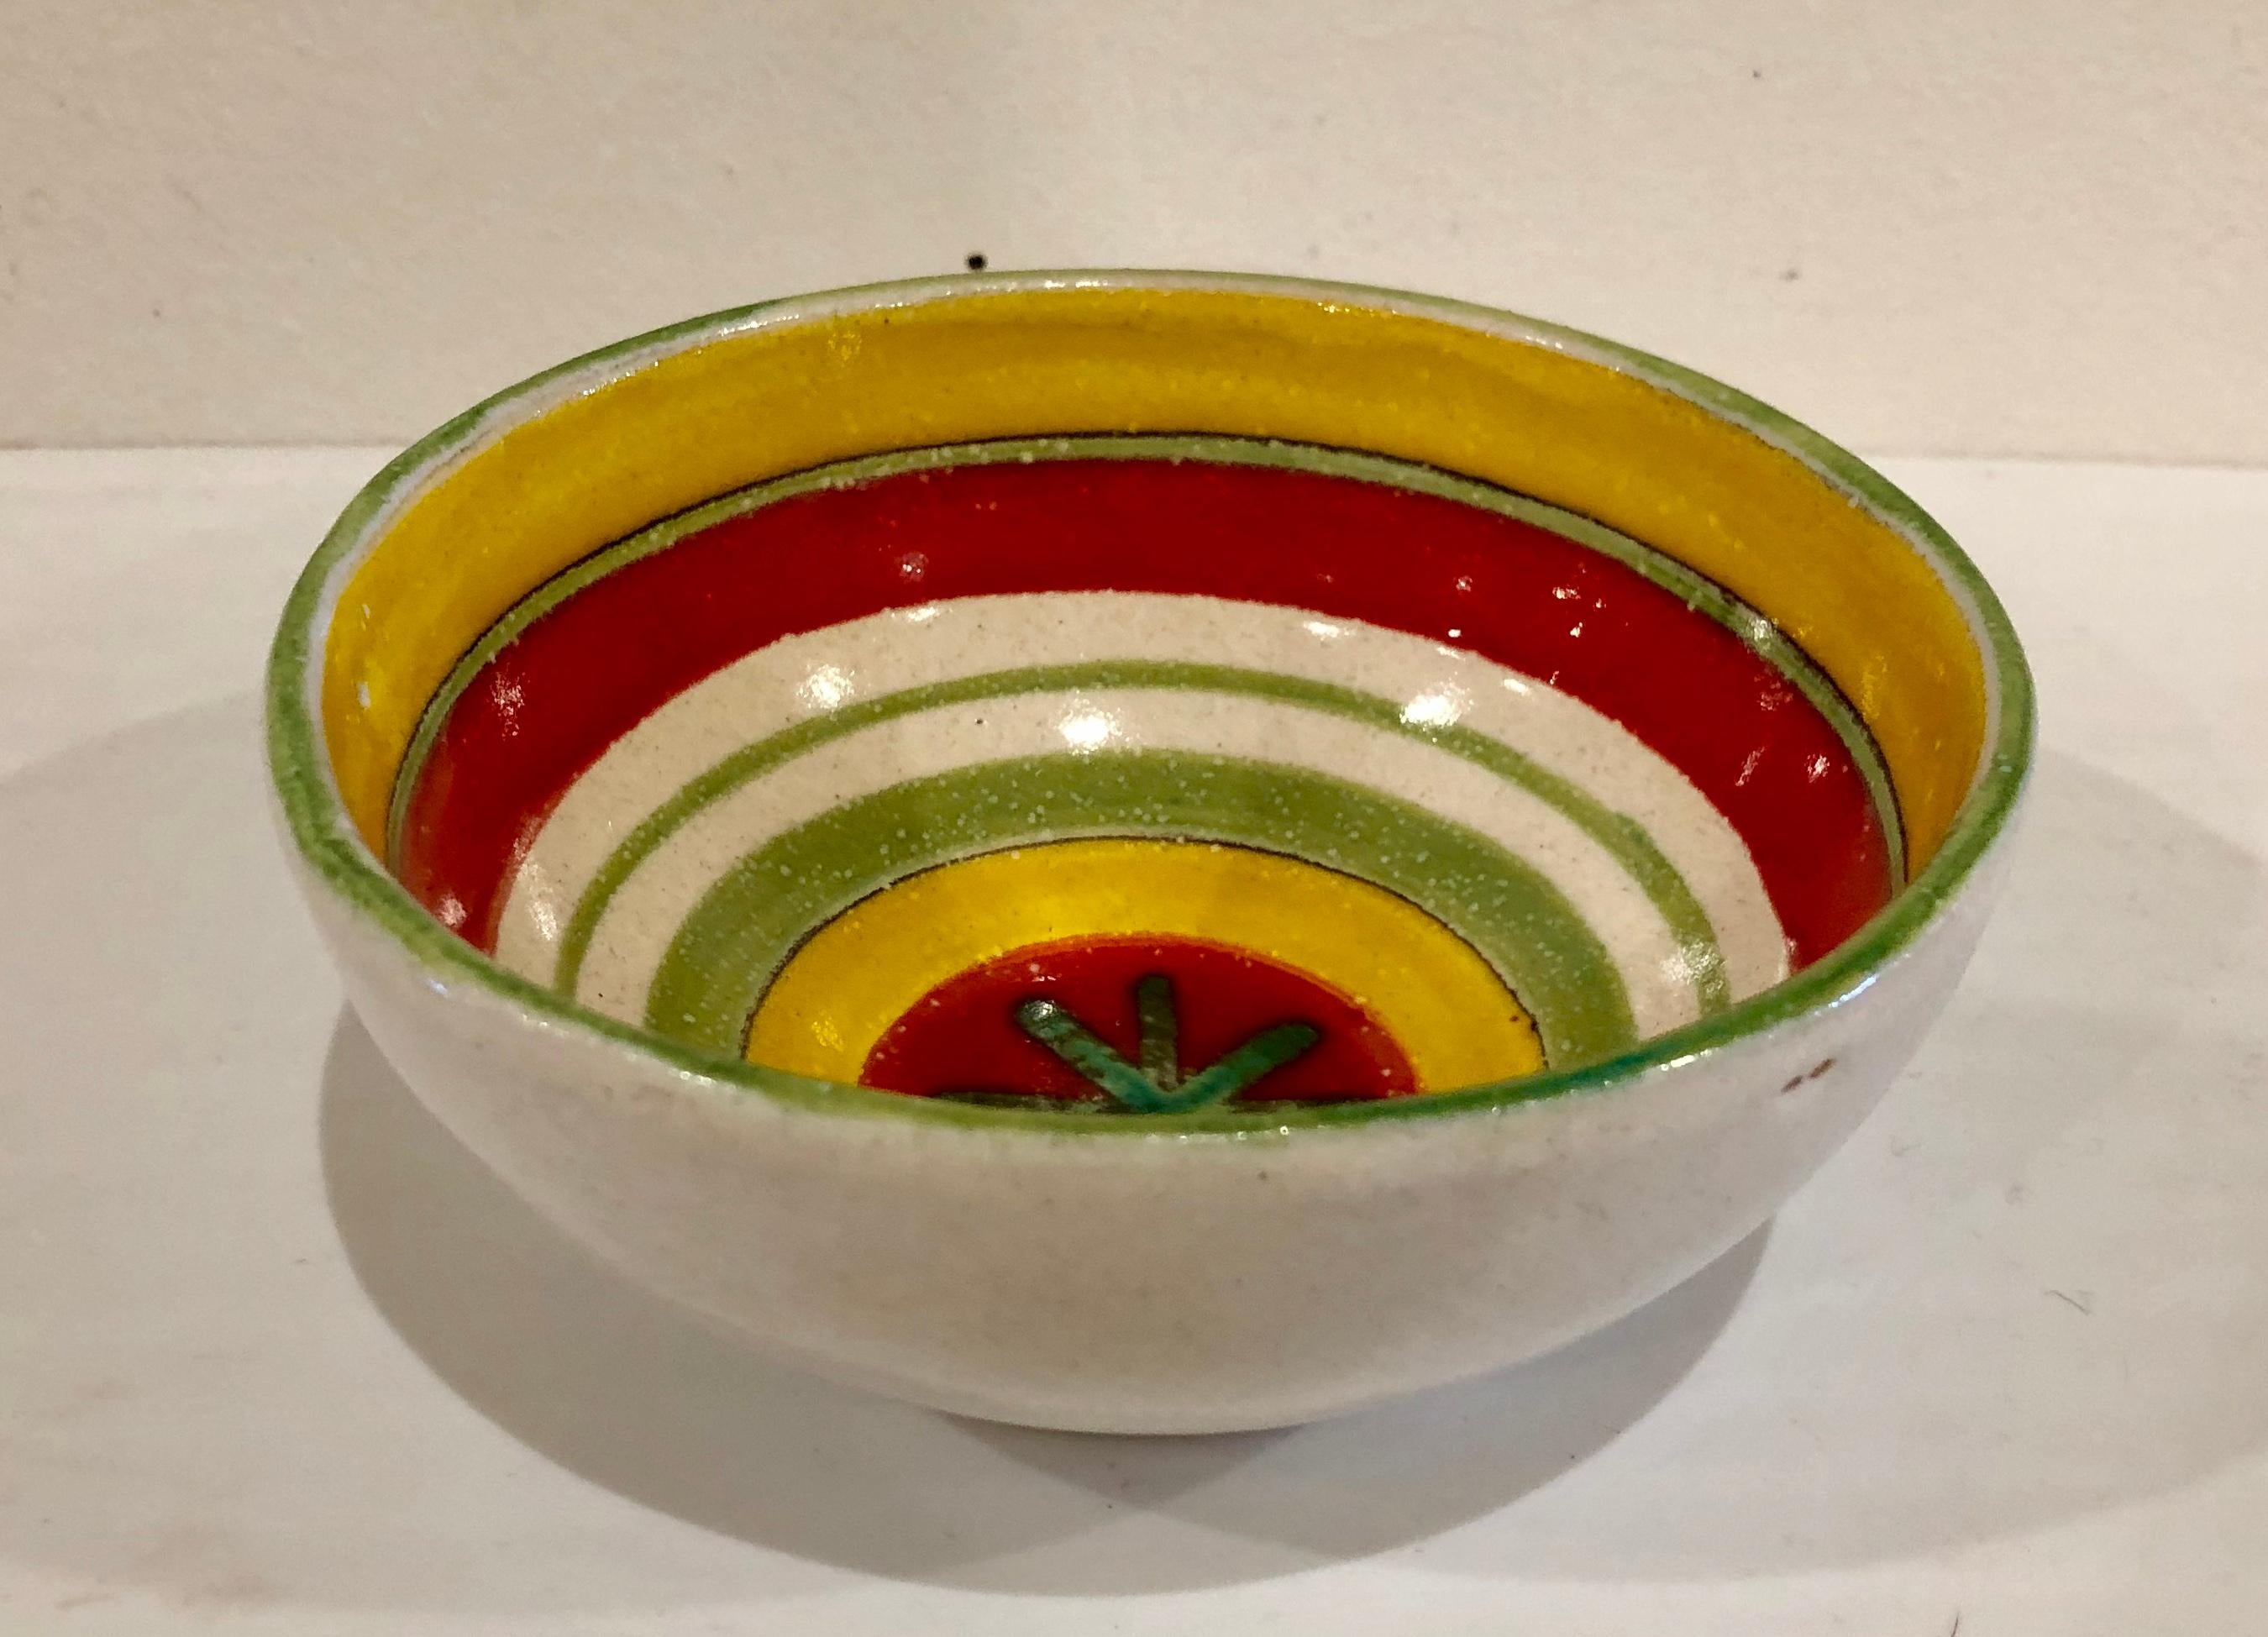 Petite decorative bowl by Giovanni de Simone of Italy, nice design beautiful colors by the master. Great condition no chips or cracks.